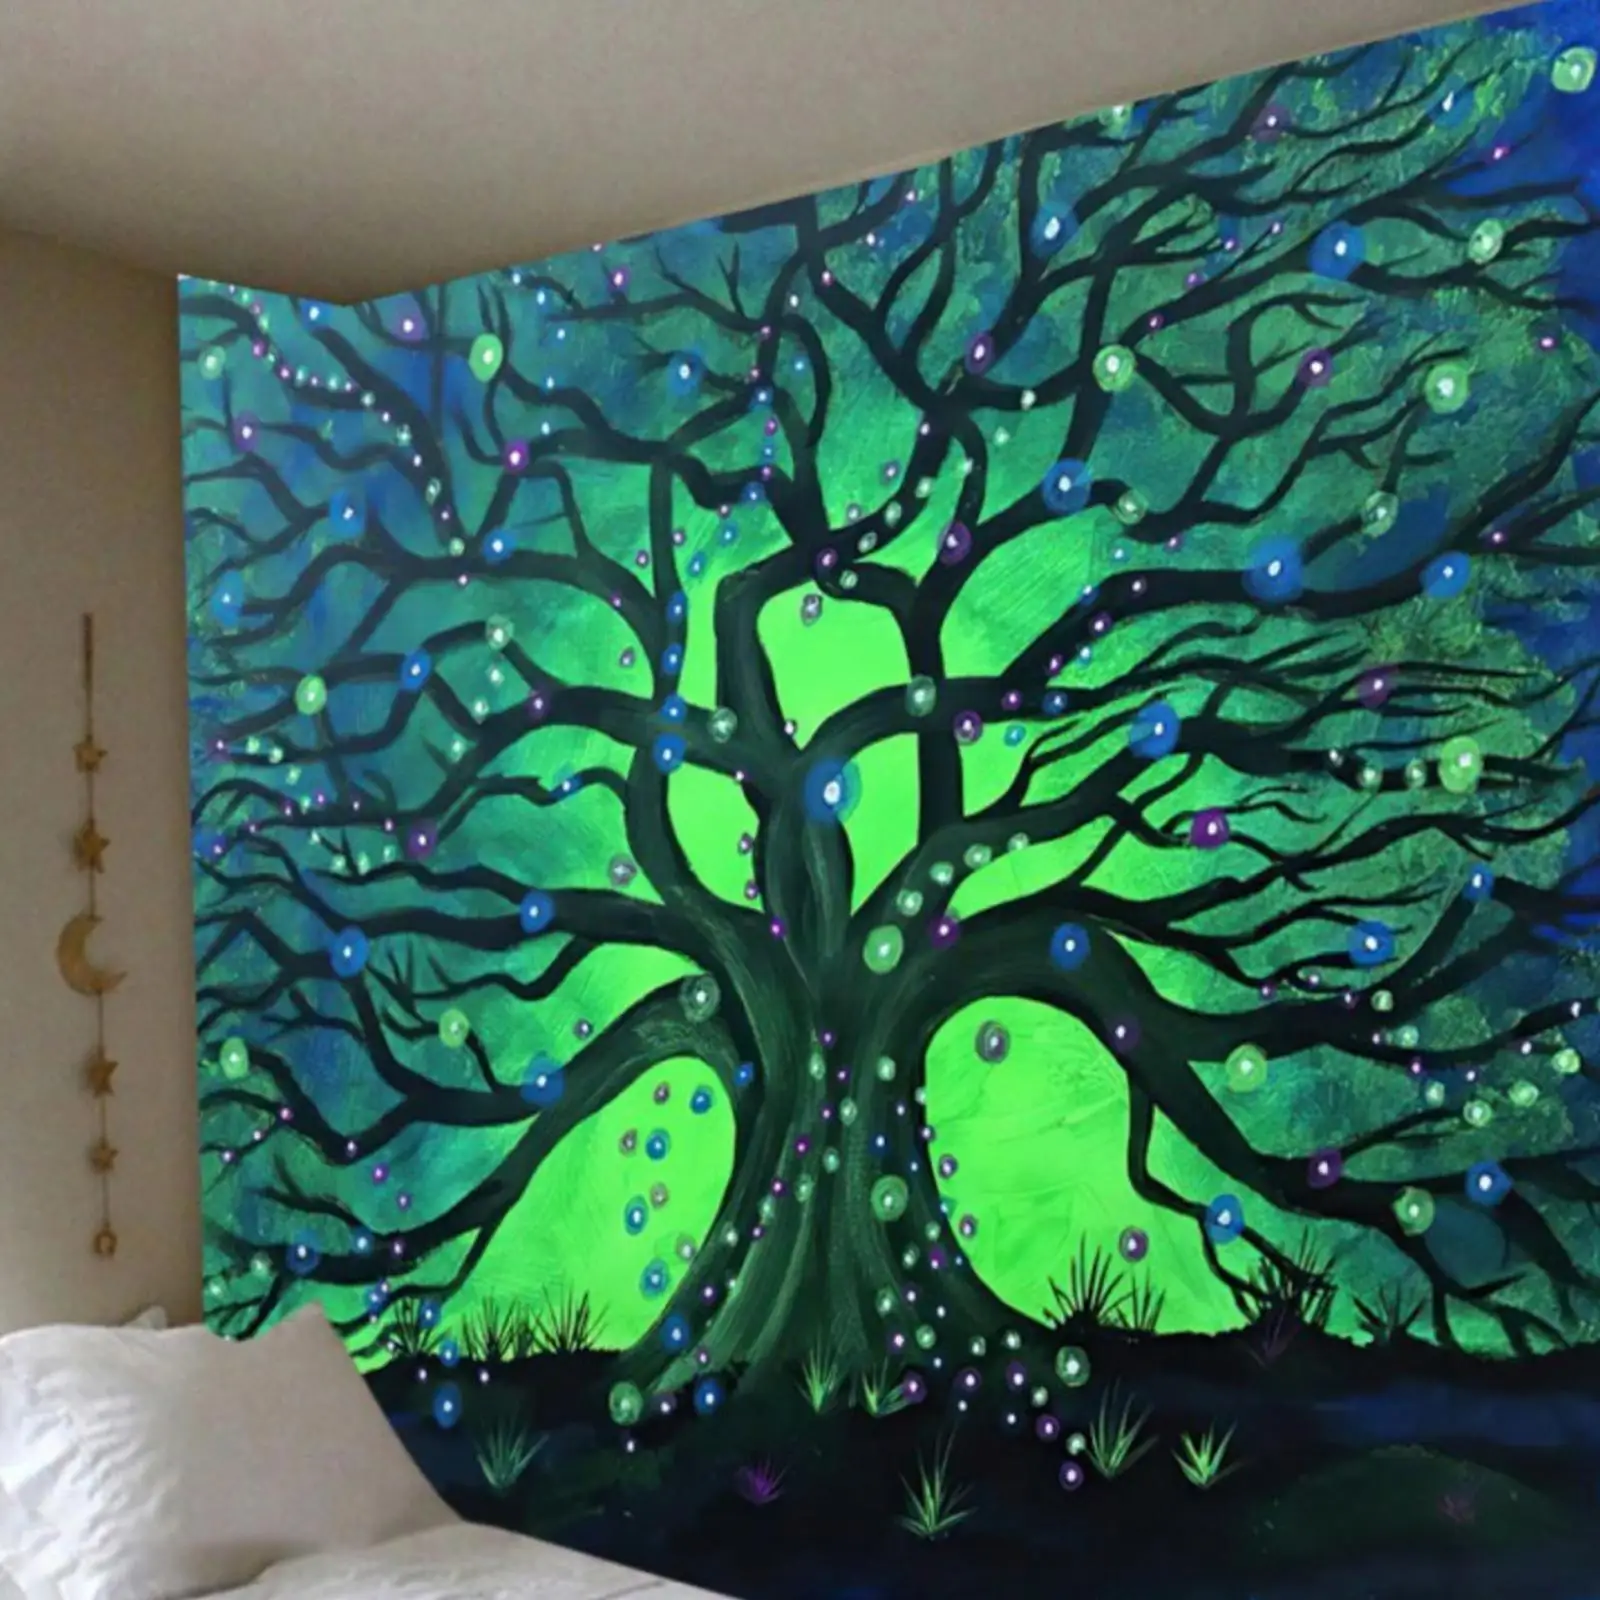 

Fairytale Dreamy Tree Tapestry Psychedelic 3d Carpet Home Room Witchcraft Bohemian Kids Decor Hippie Decor N0v0